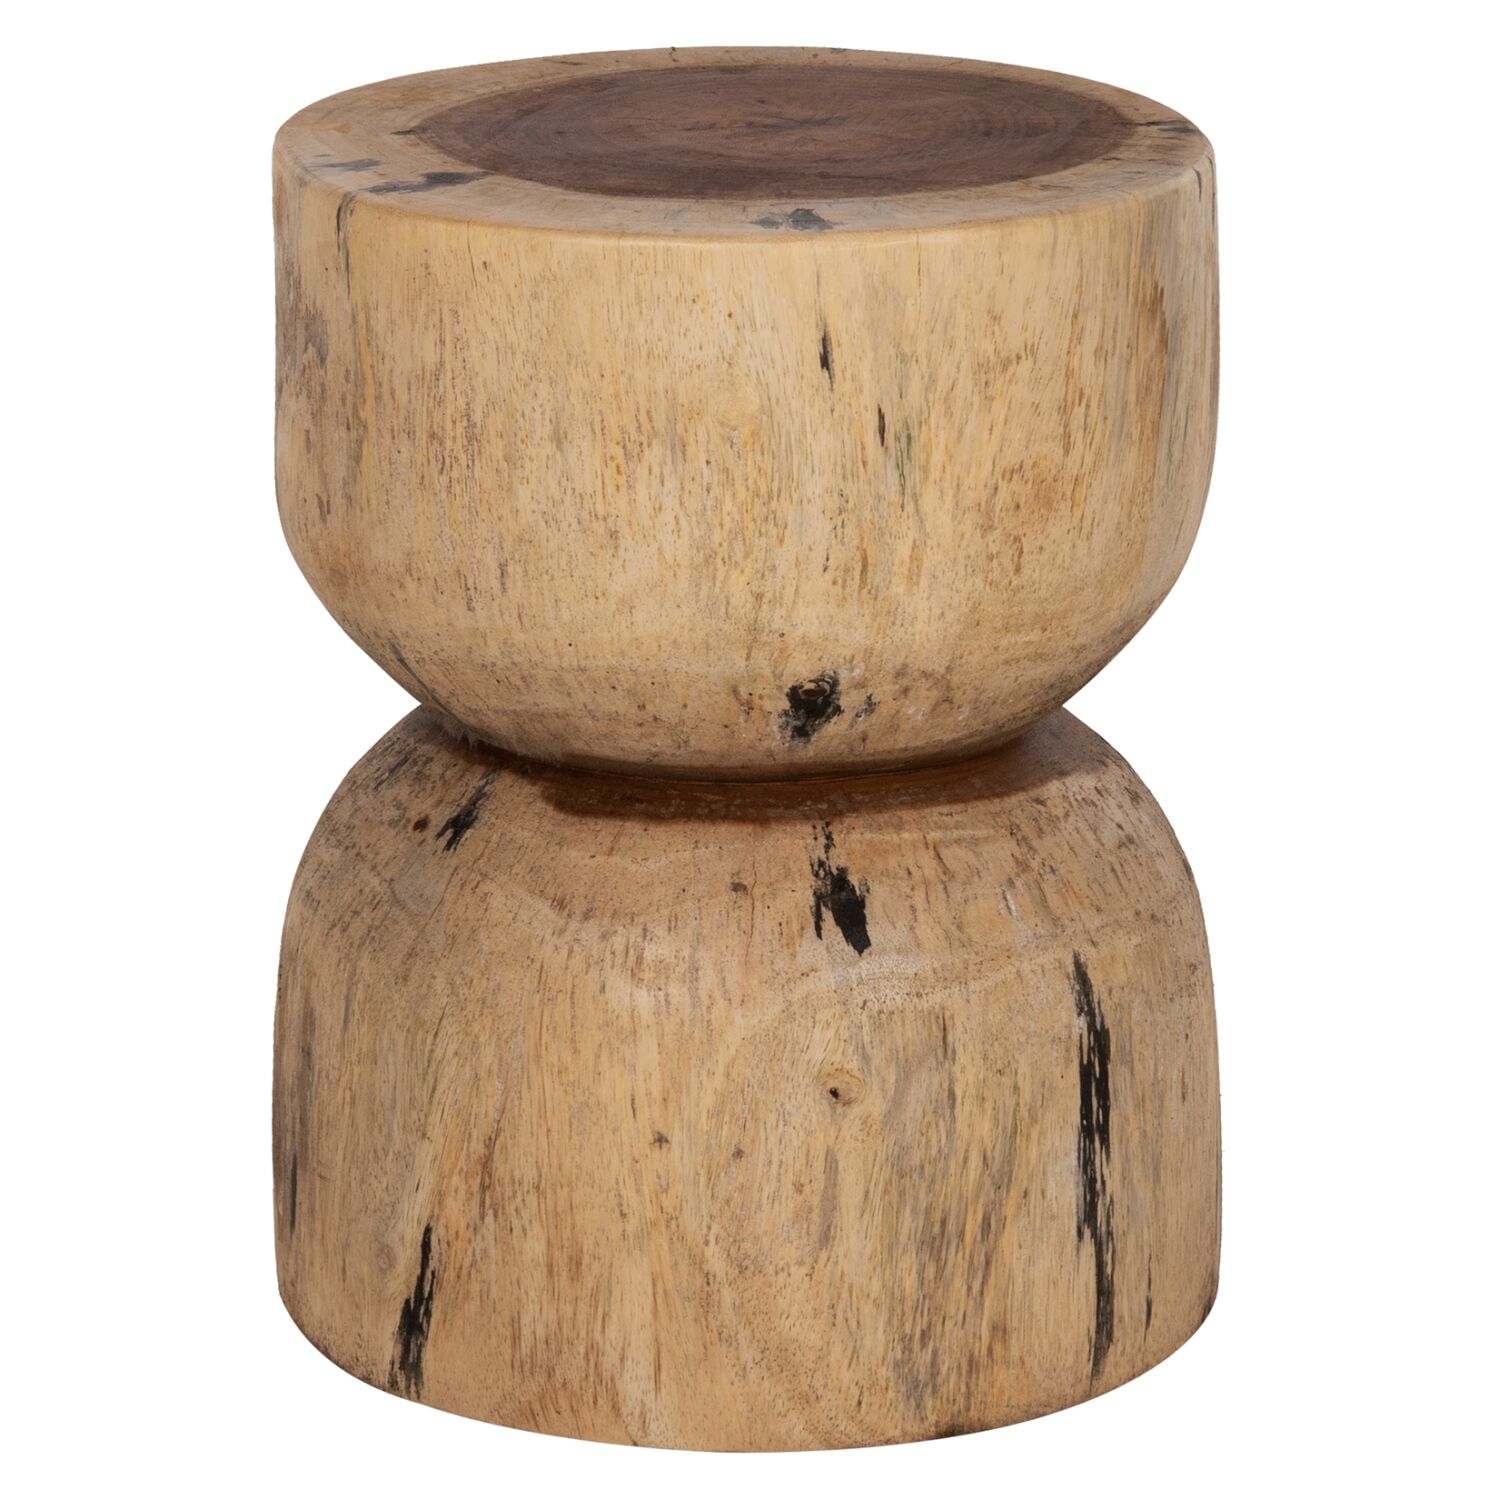 ROUND STOOL FEBRY HM9753 SOLID SUAR WOOD IN NATURAL Φ35x45Hcm.